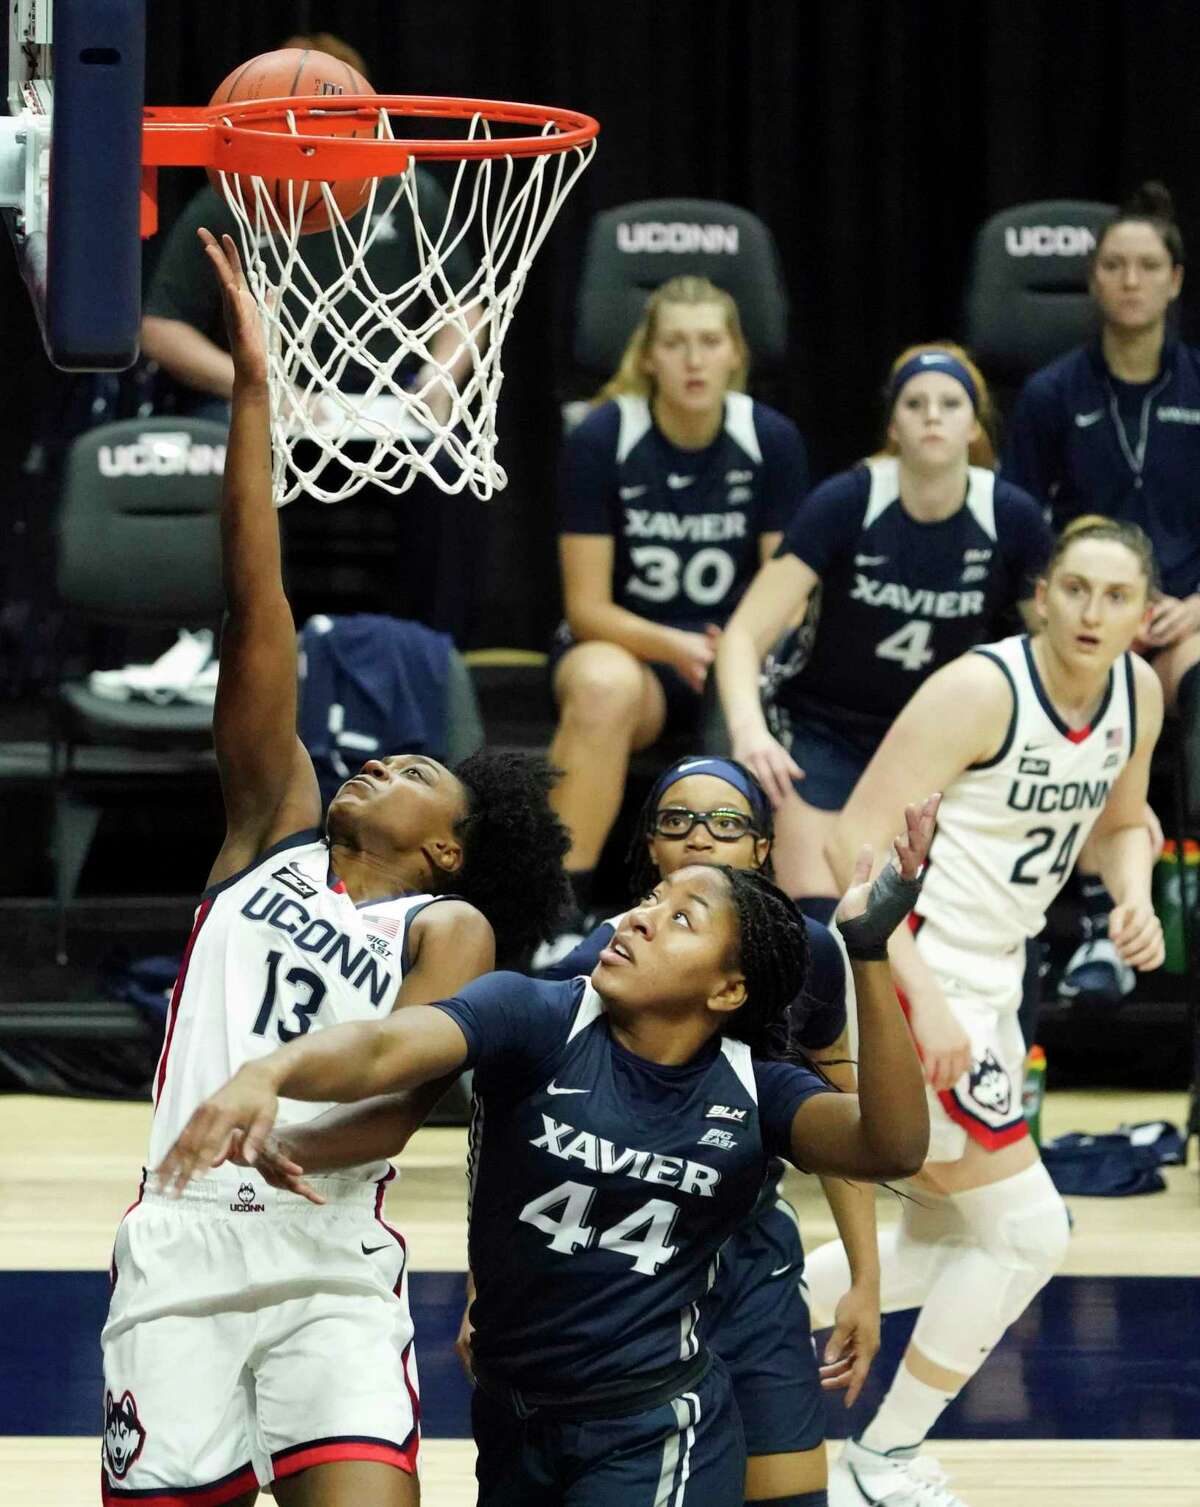 UConn’s Christyn Williams (13) shoots and is fouled by Xavier’s Ayanna Townsend during the first half Saturday in Storrs.